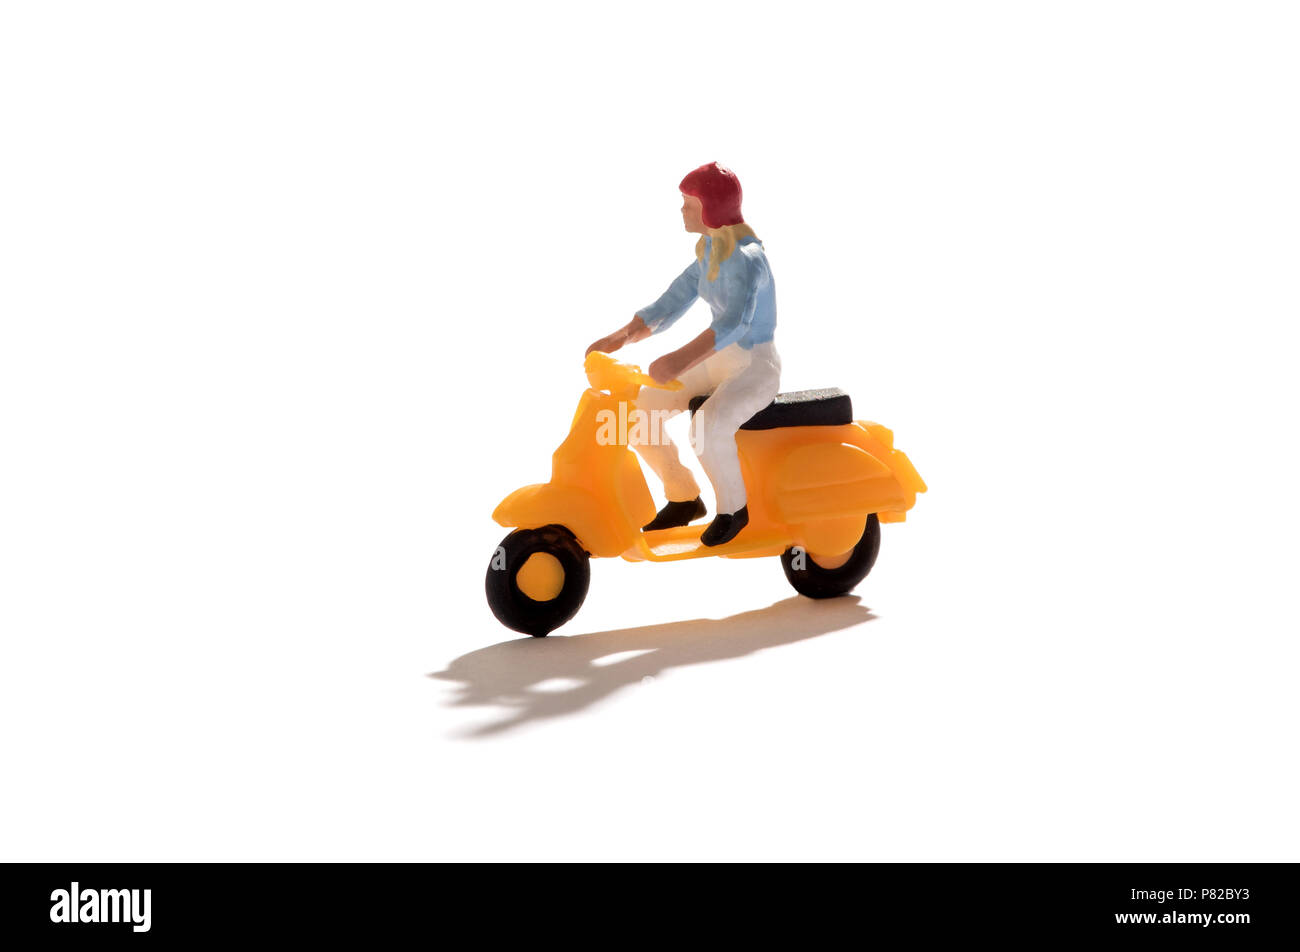 Miniature person riding a bright yellow scooter isolated on white with copy space with a front shadow Stock Photo